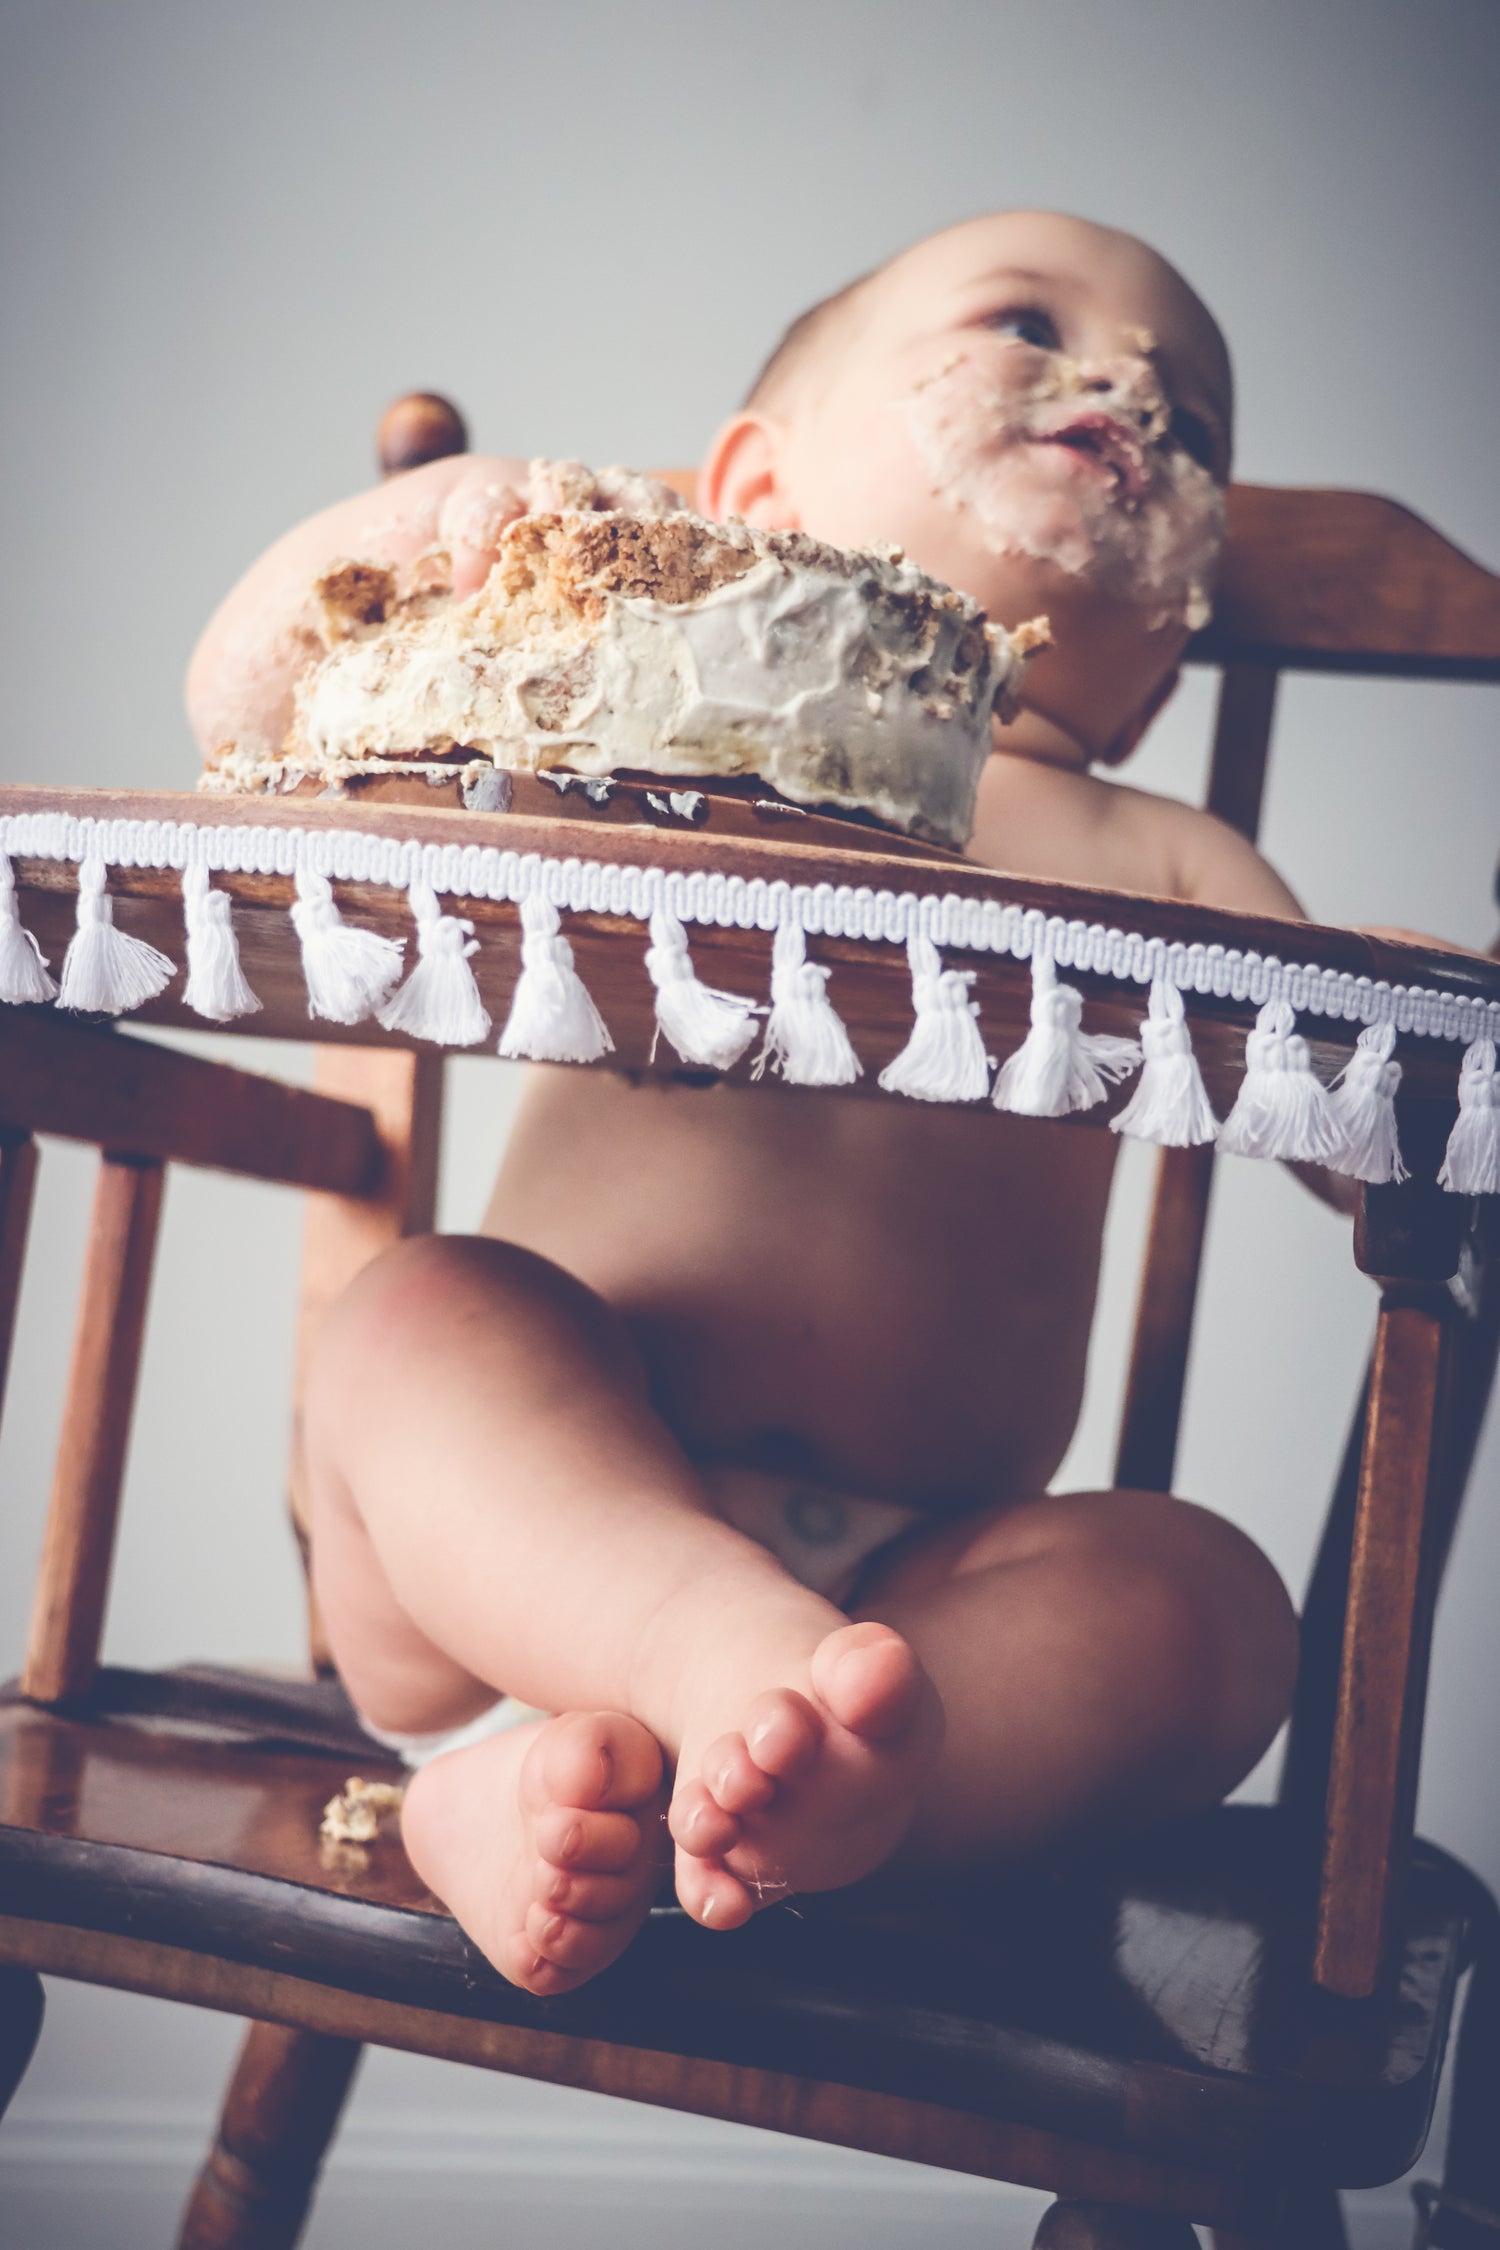 A baby in a high chair with a smashed birthday cake